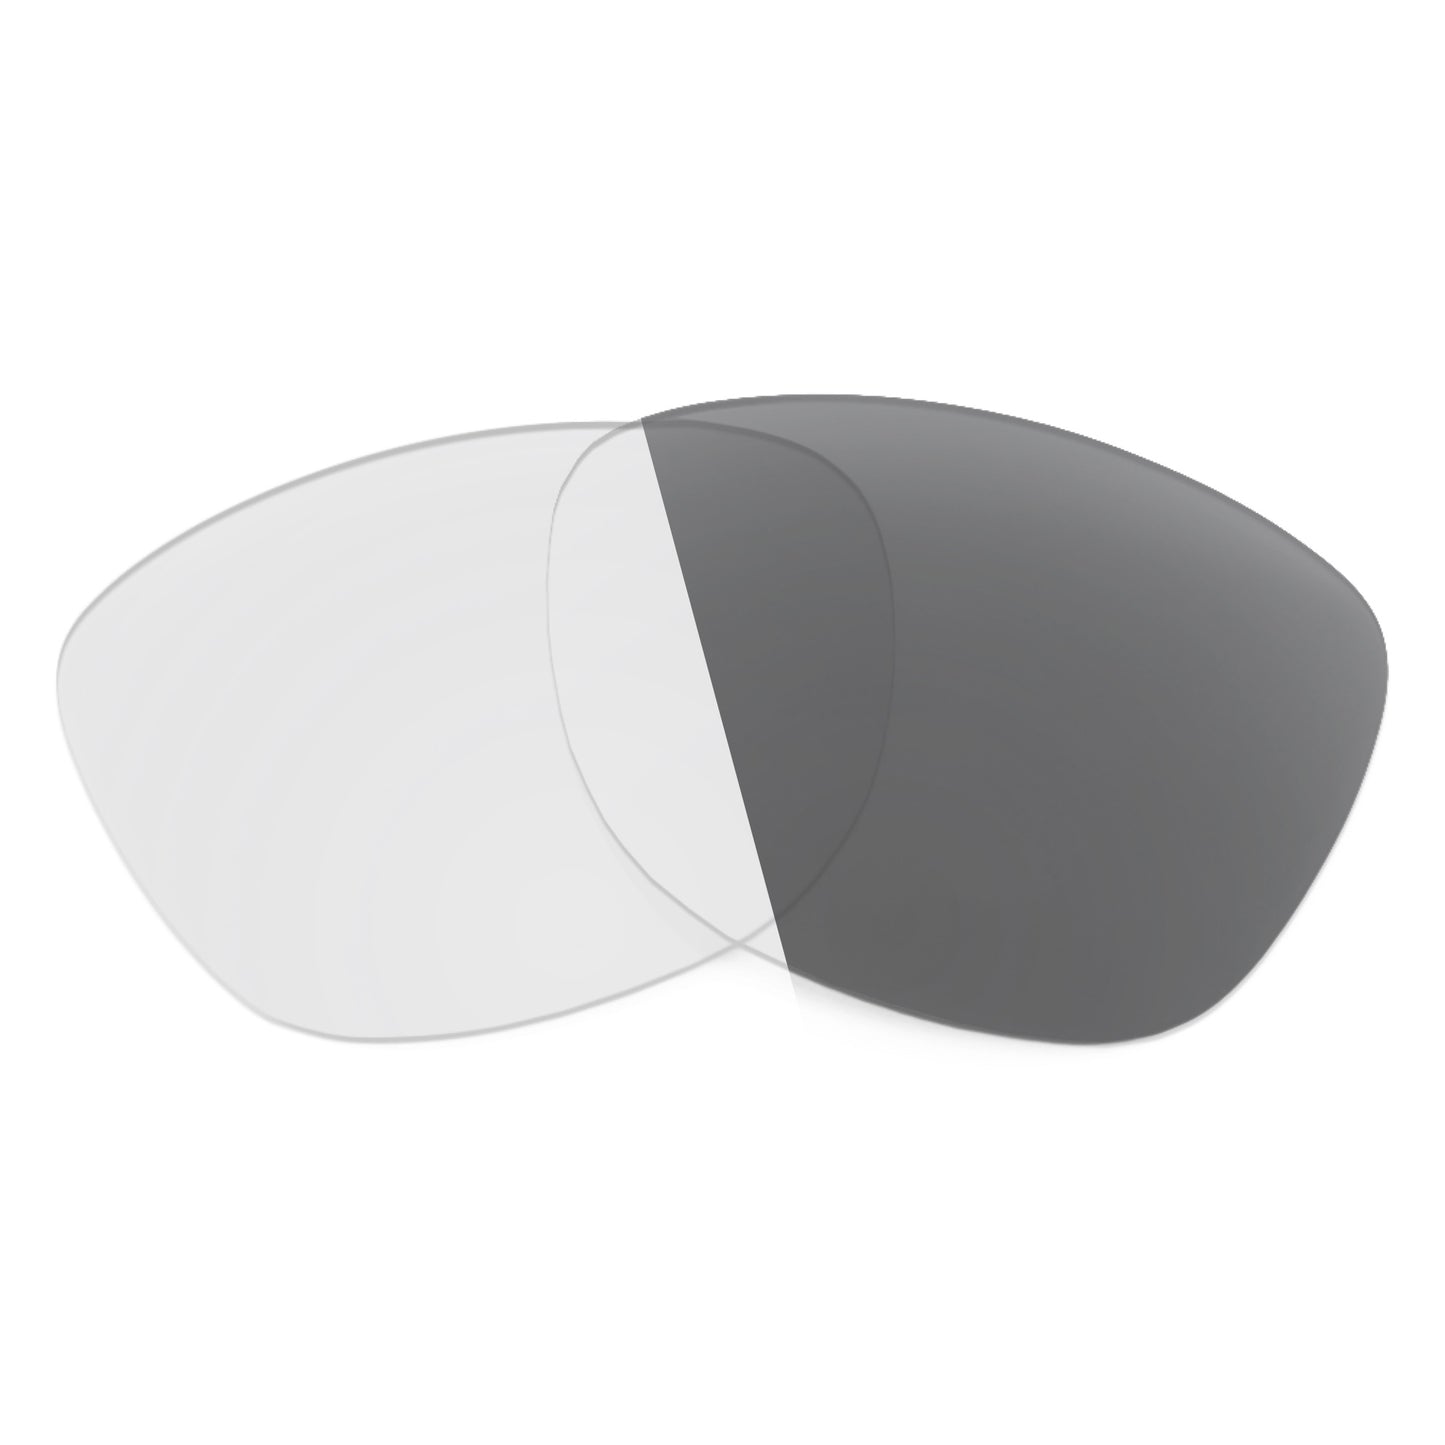 Revant replacement lenses for Ray-Ban RB4194 53mm Non-Polarized Adapt Gray Photochromic